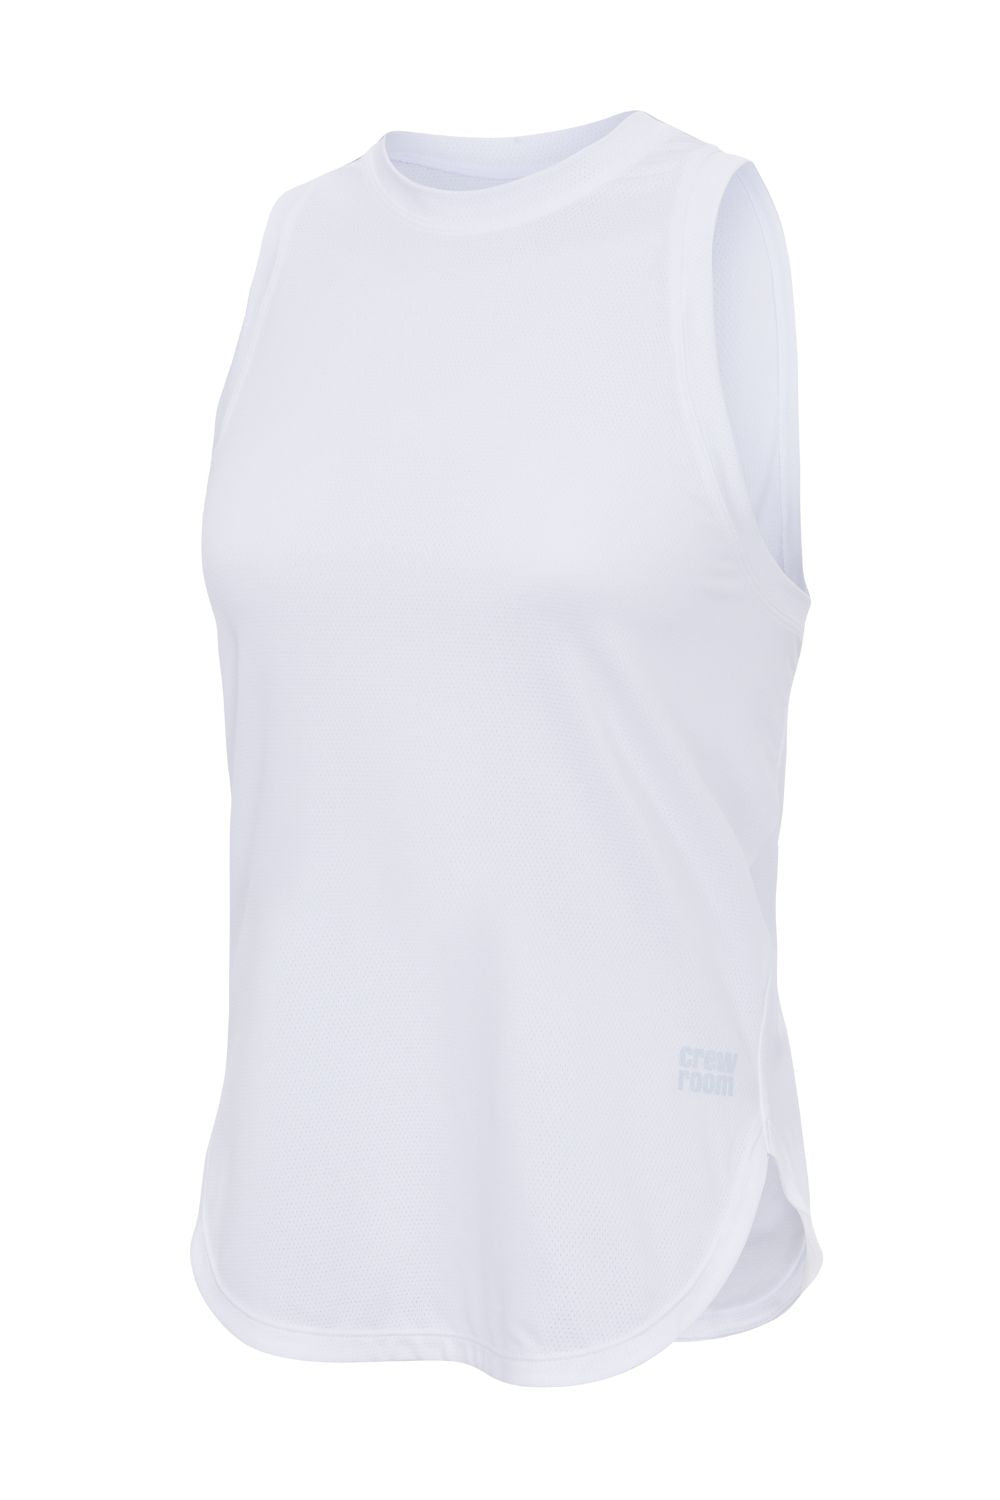 The Relaxed Tank (Women's)